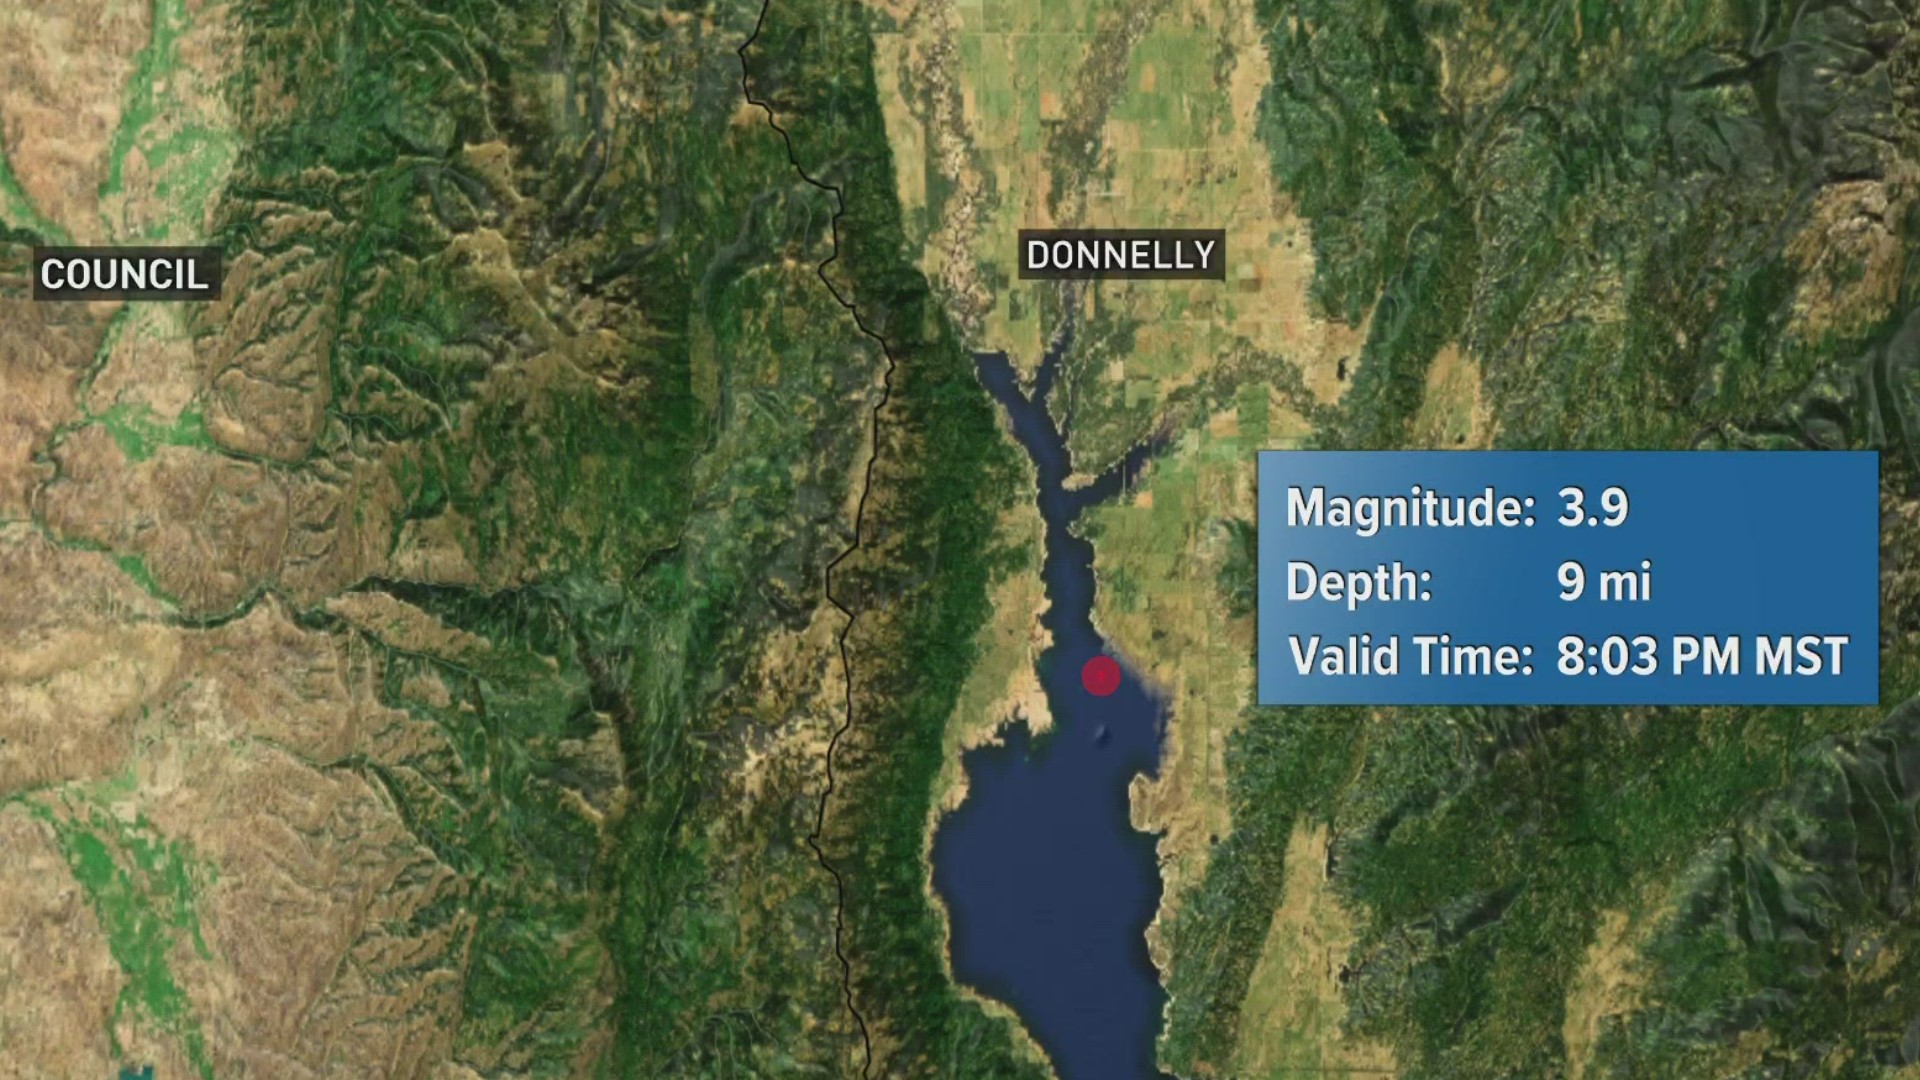 A magnitude 3.9 earthquake struck just after 8 p.m. Saturday, roughly 6.8 miles south of Donnelly, the U.S. Geological Survey reports.